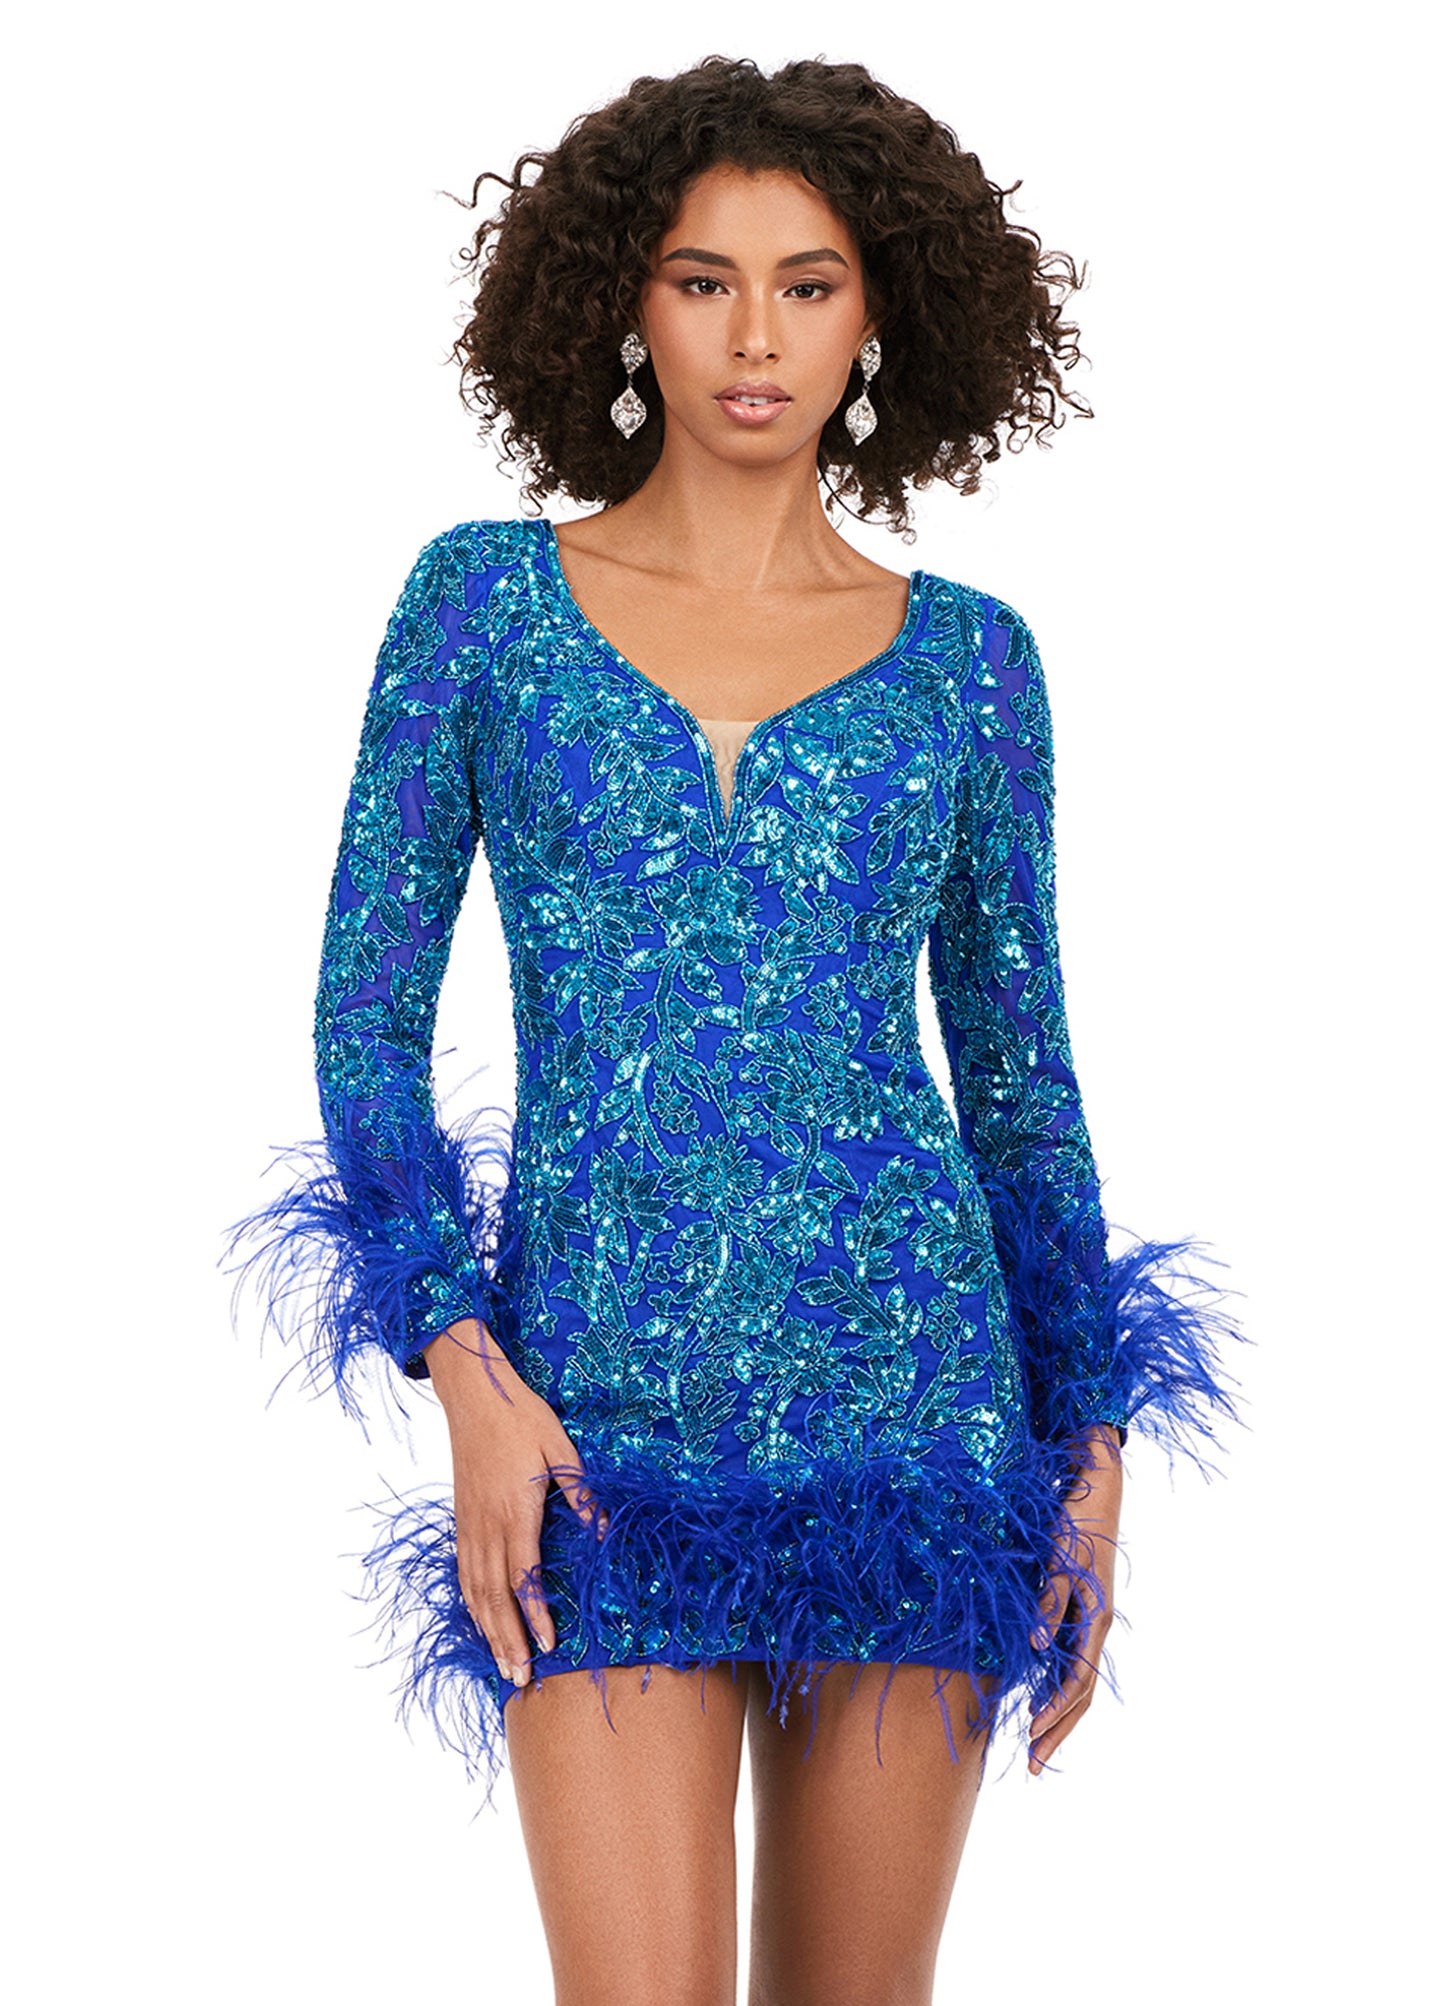 Ashley Lauren 4616 Long Sleeve Feather Detail Sequin V-Neck Open Back Cocktail Homecoming Dress. Feel luxurious in this fully sequin, open back cocktail dress. We added the perfect amount of drama with feathers along the skirt and sleeves of this dress.